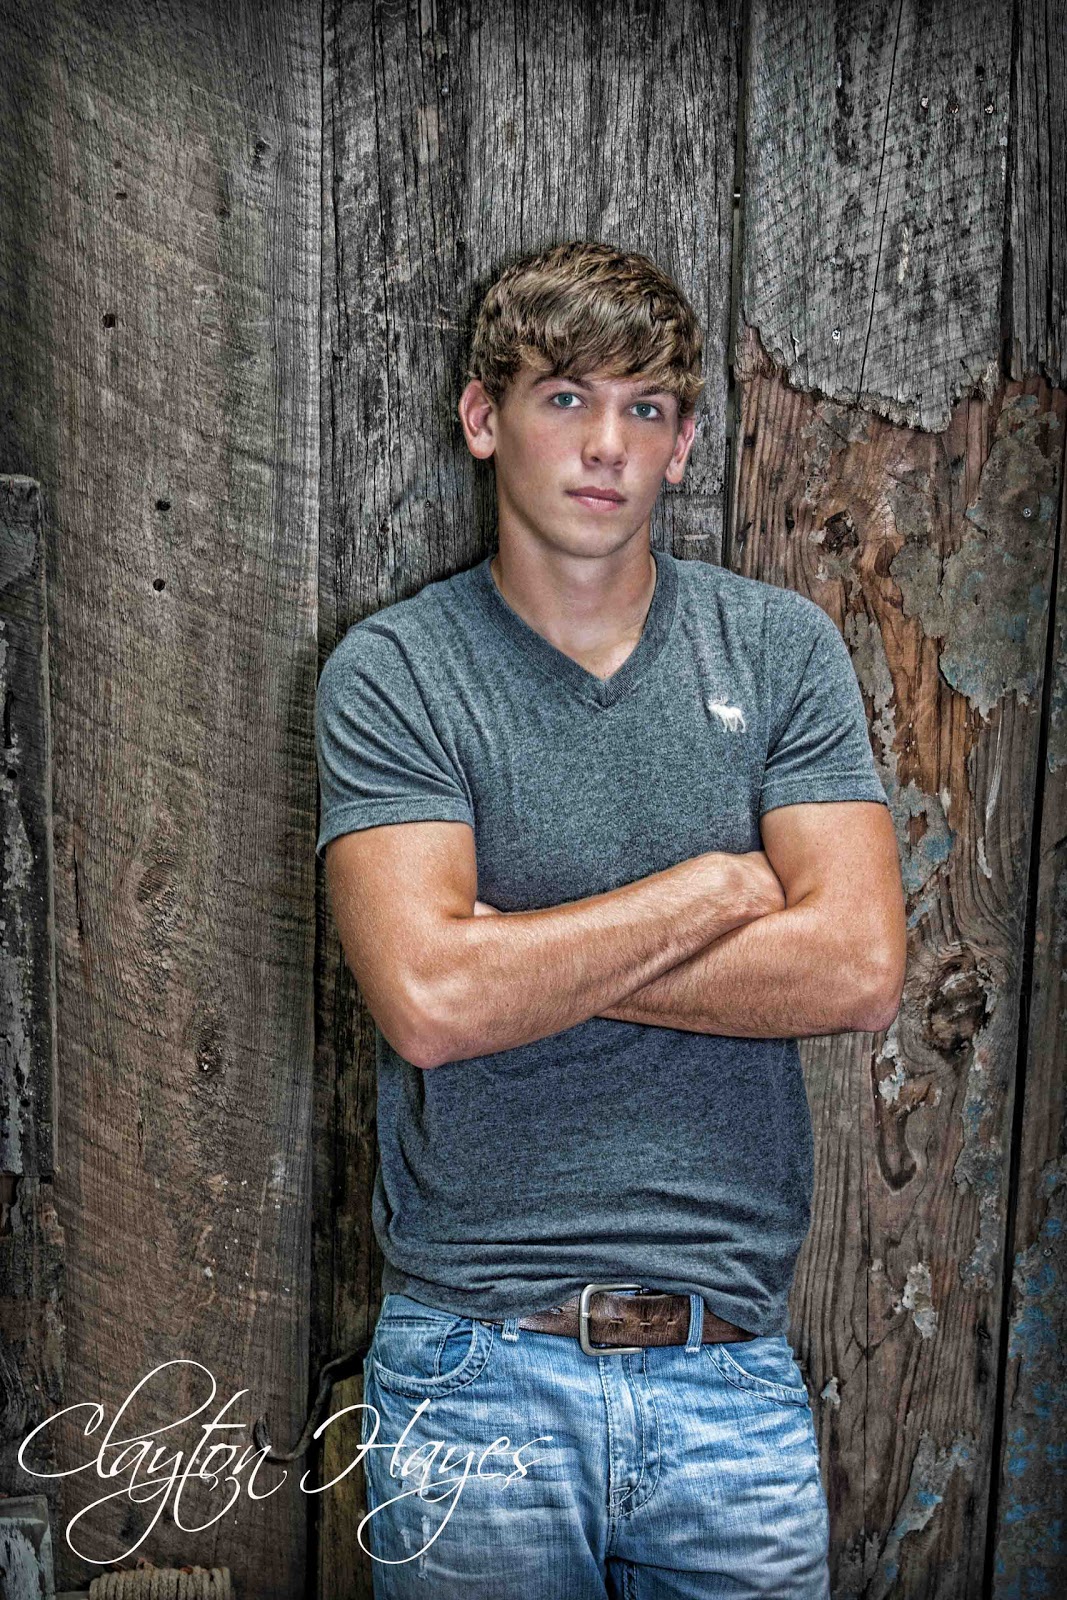 Senior Picture Ideas For Guys : 10 Awesome Senior Picture Ideas For ...